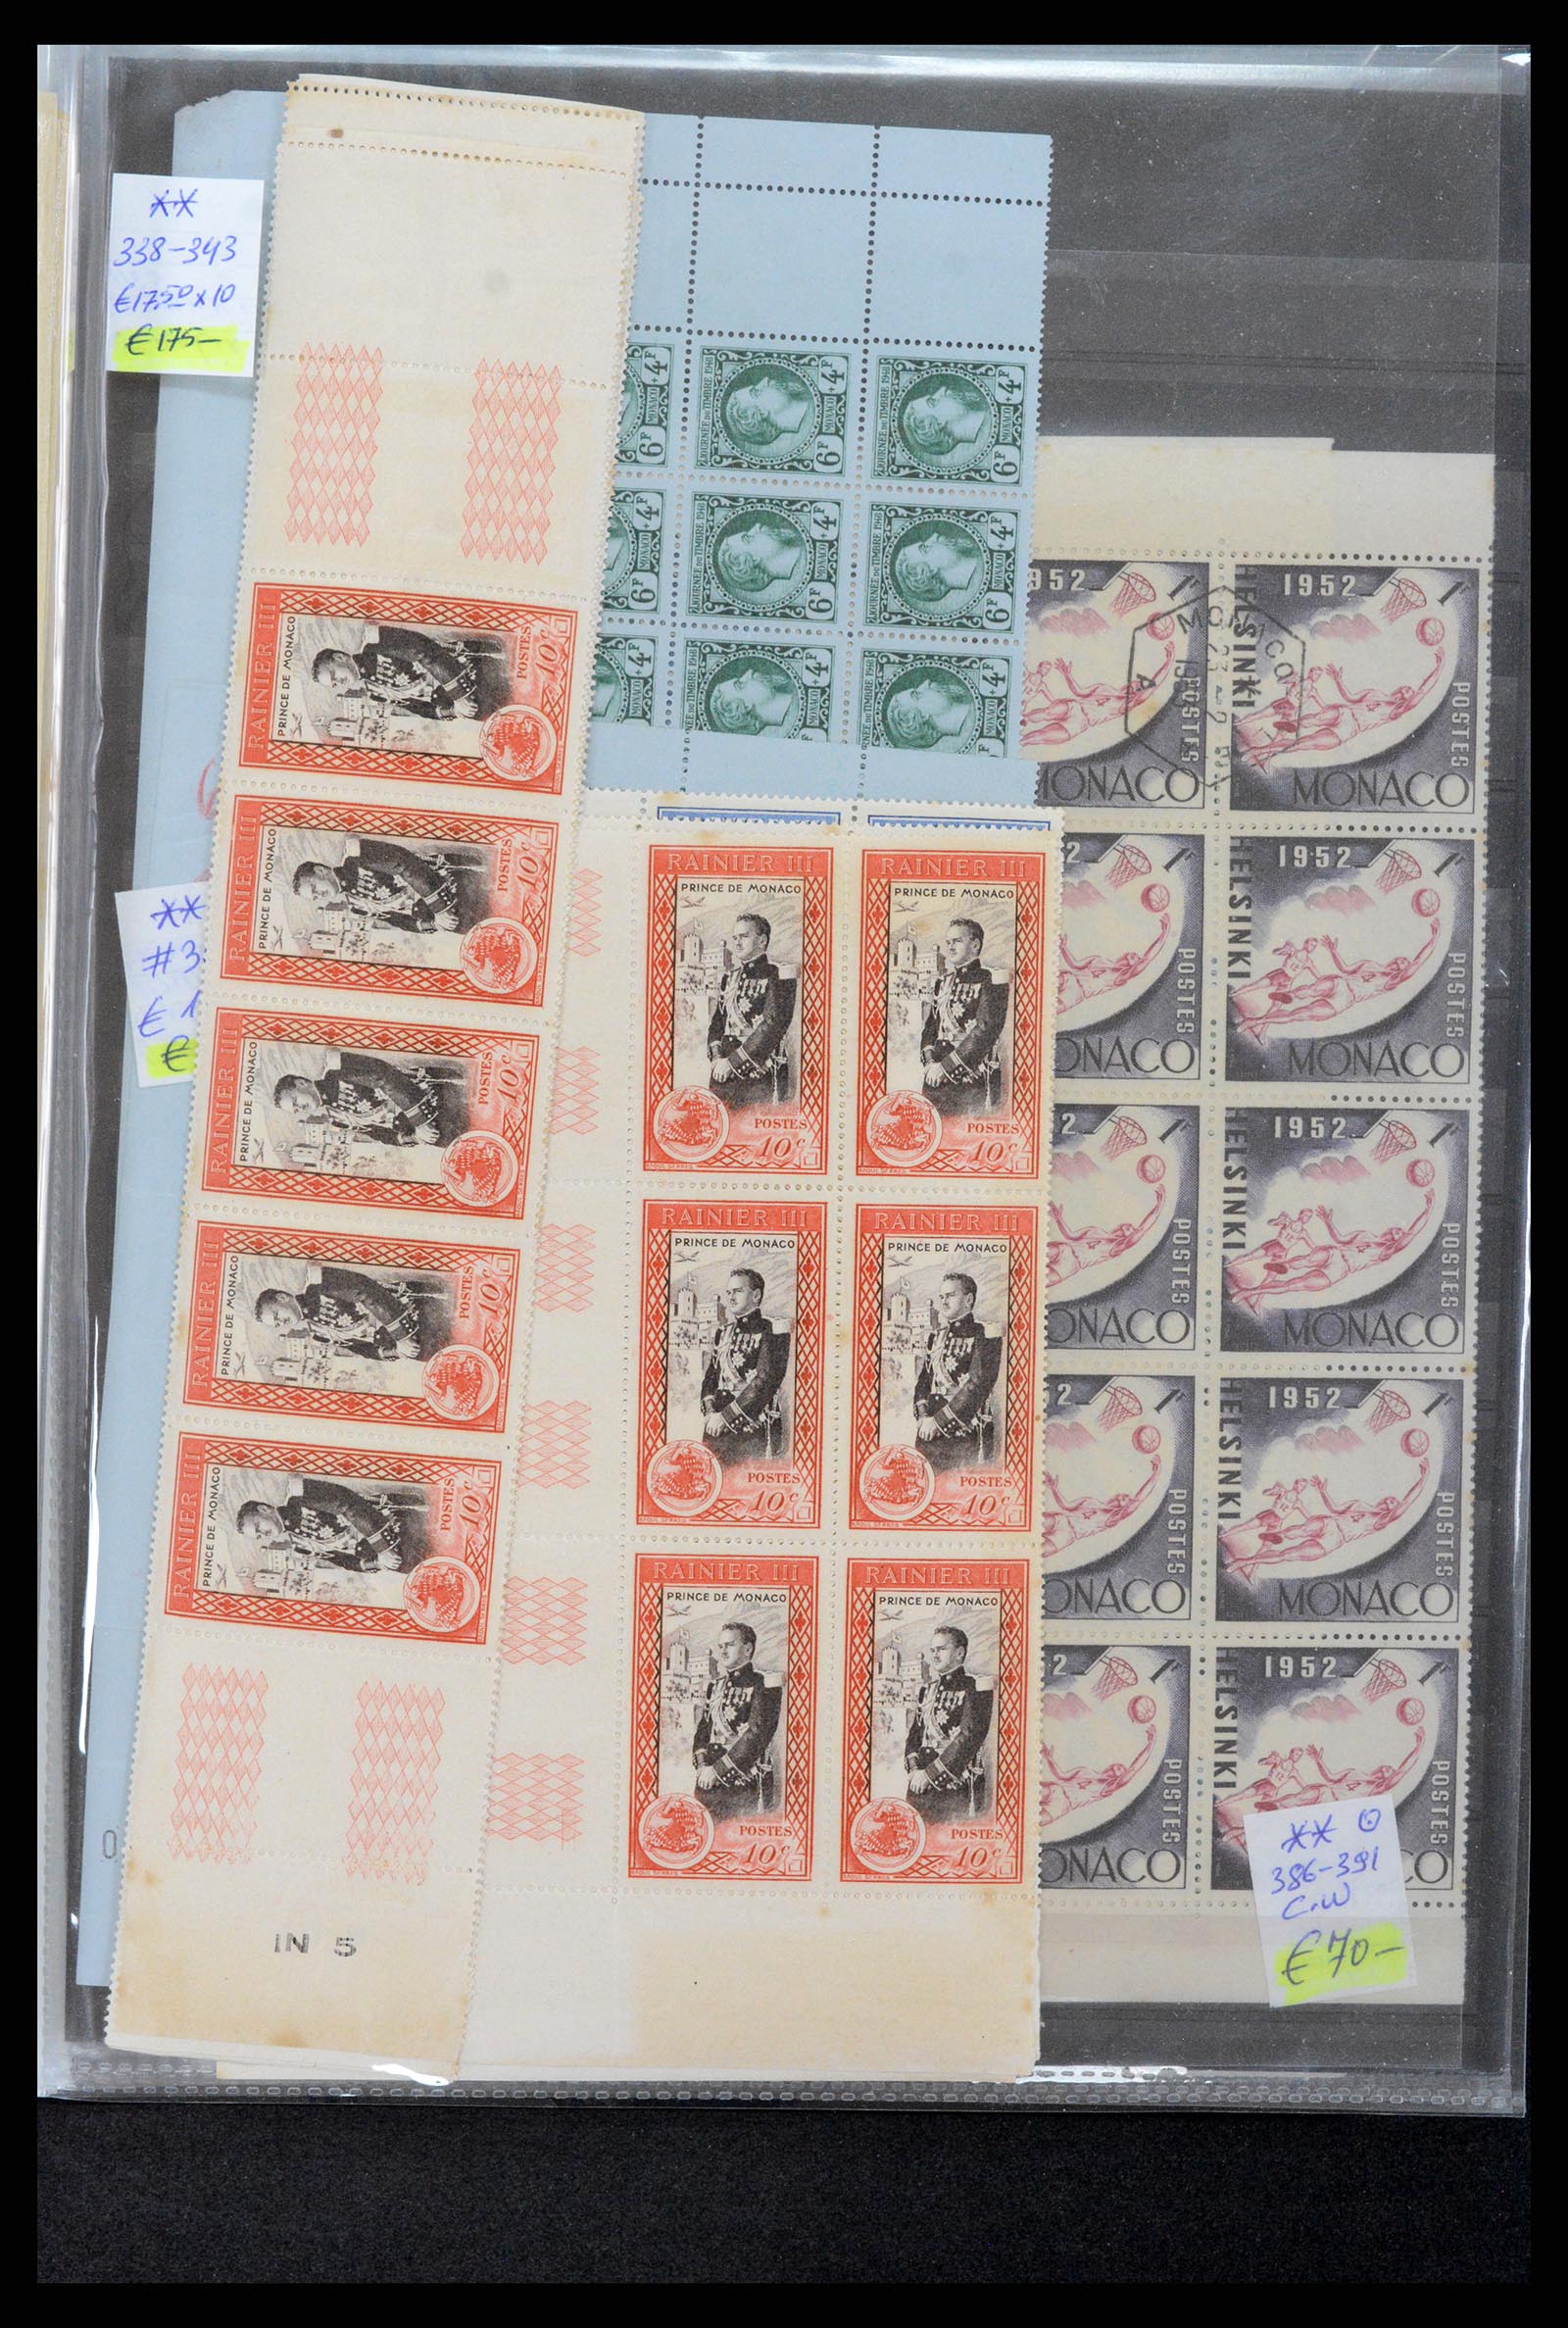 37984 016 - Stamp collection 37984 Monaco better issues 1942-1982.